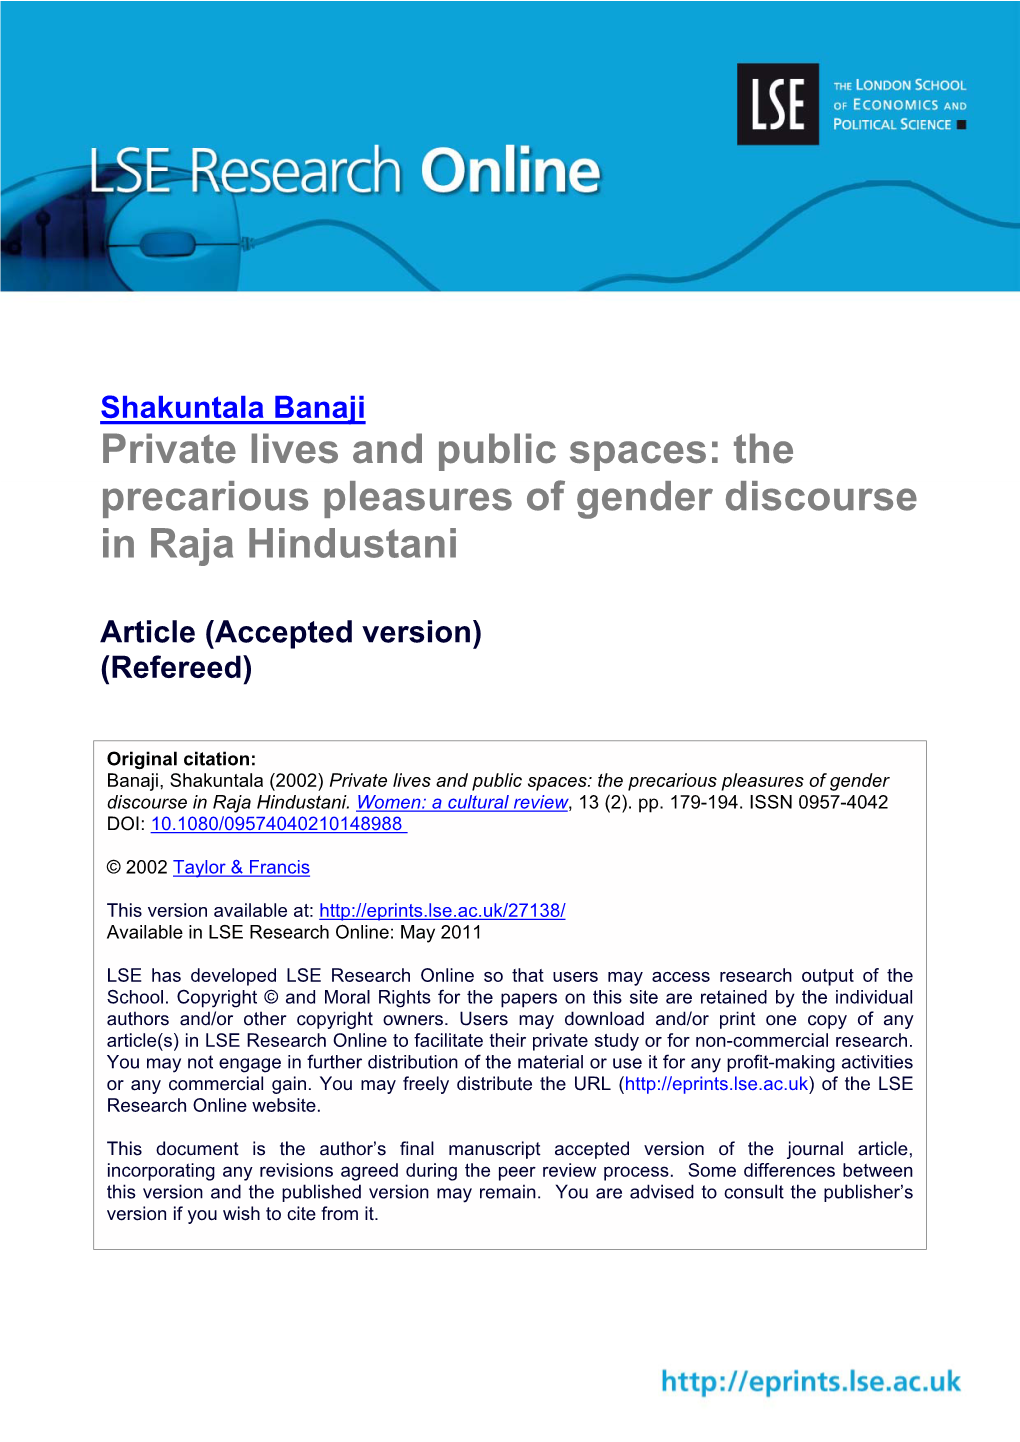 Private Lives and Public Spaces: the Precarious Pleasures of Gender Discourse in Raja Hindustani